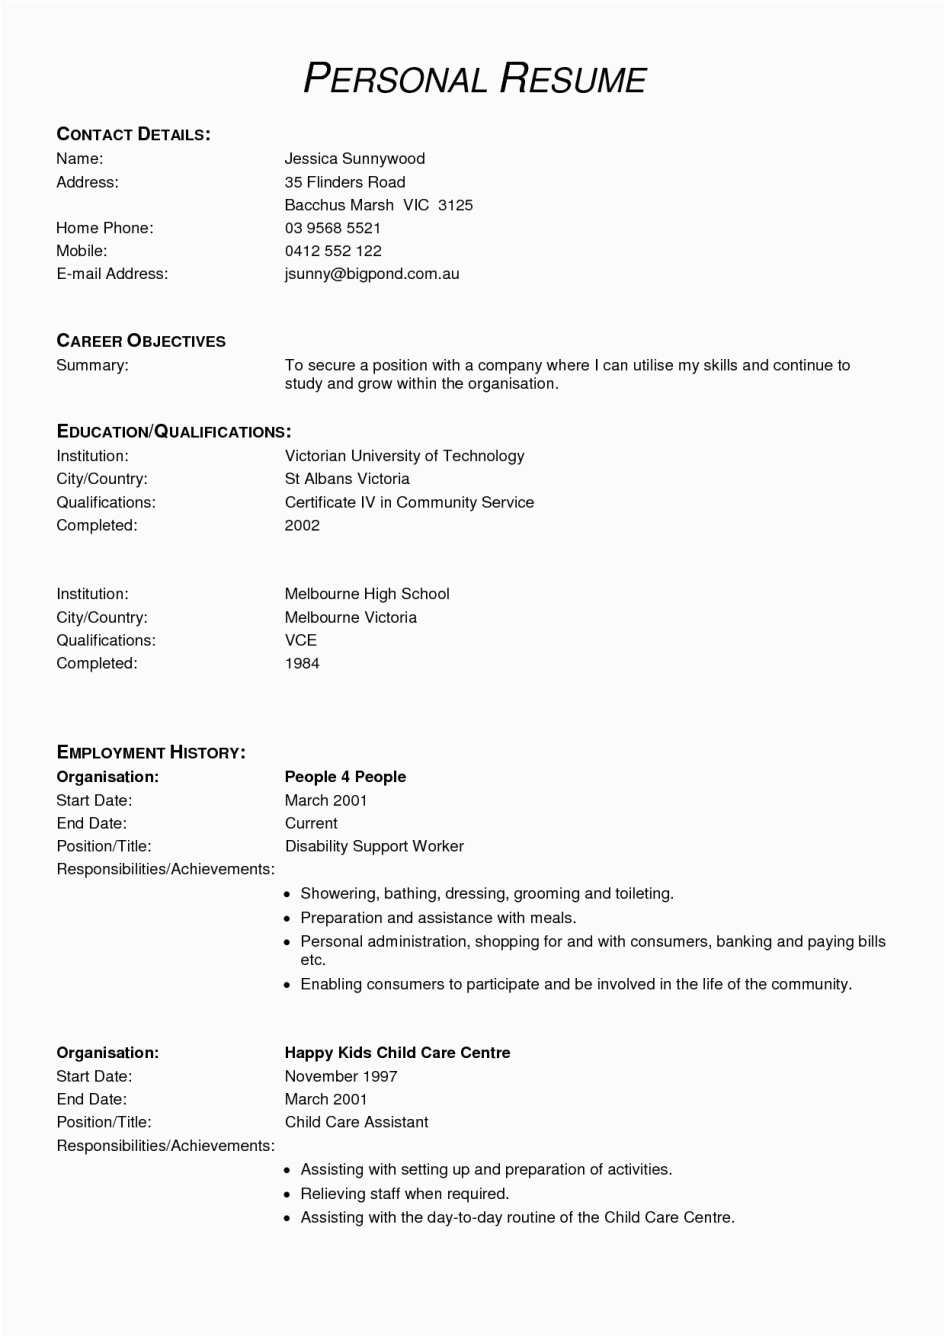 Resume Sample for Receptionist Position with No Experience Health Care assistant Cv with No Experience 945×1337